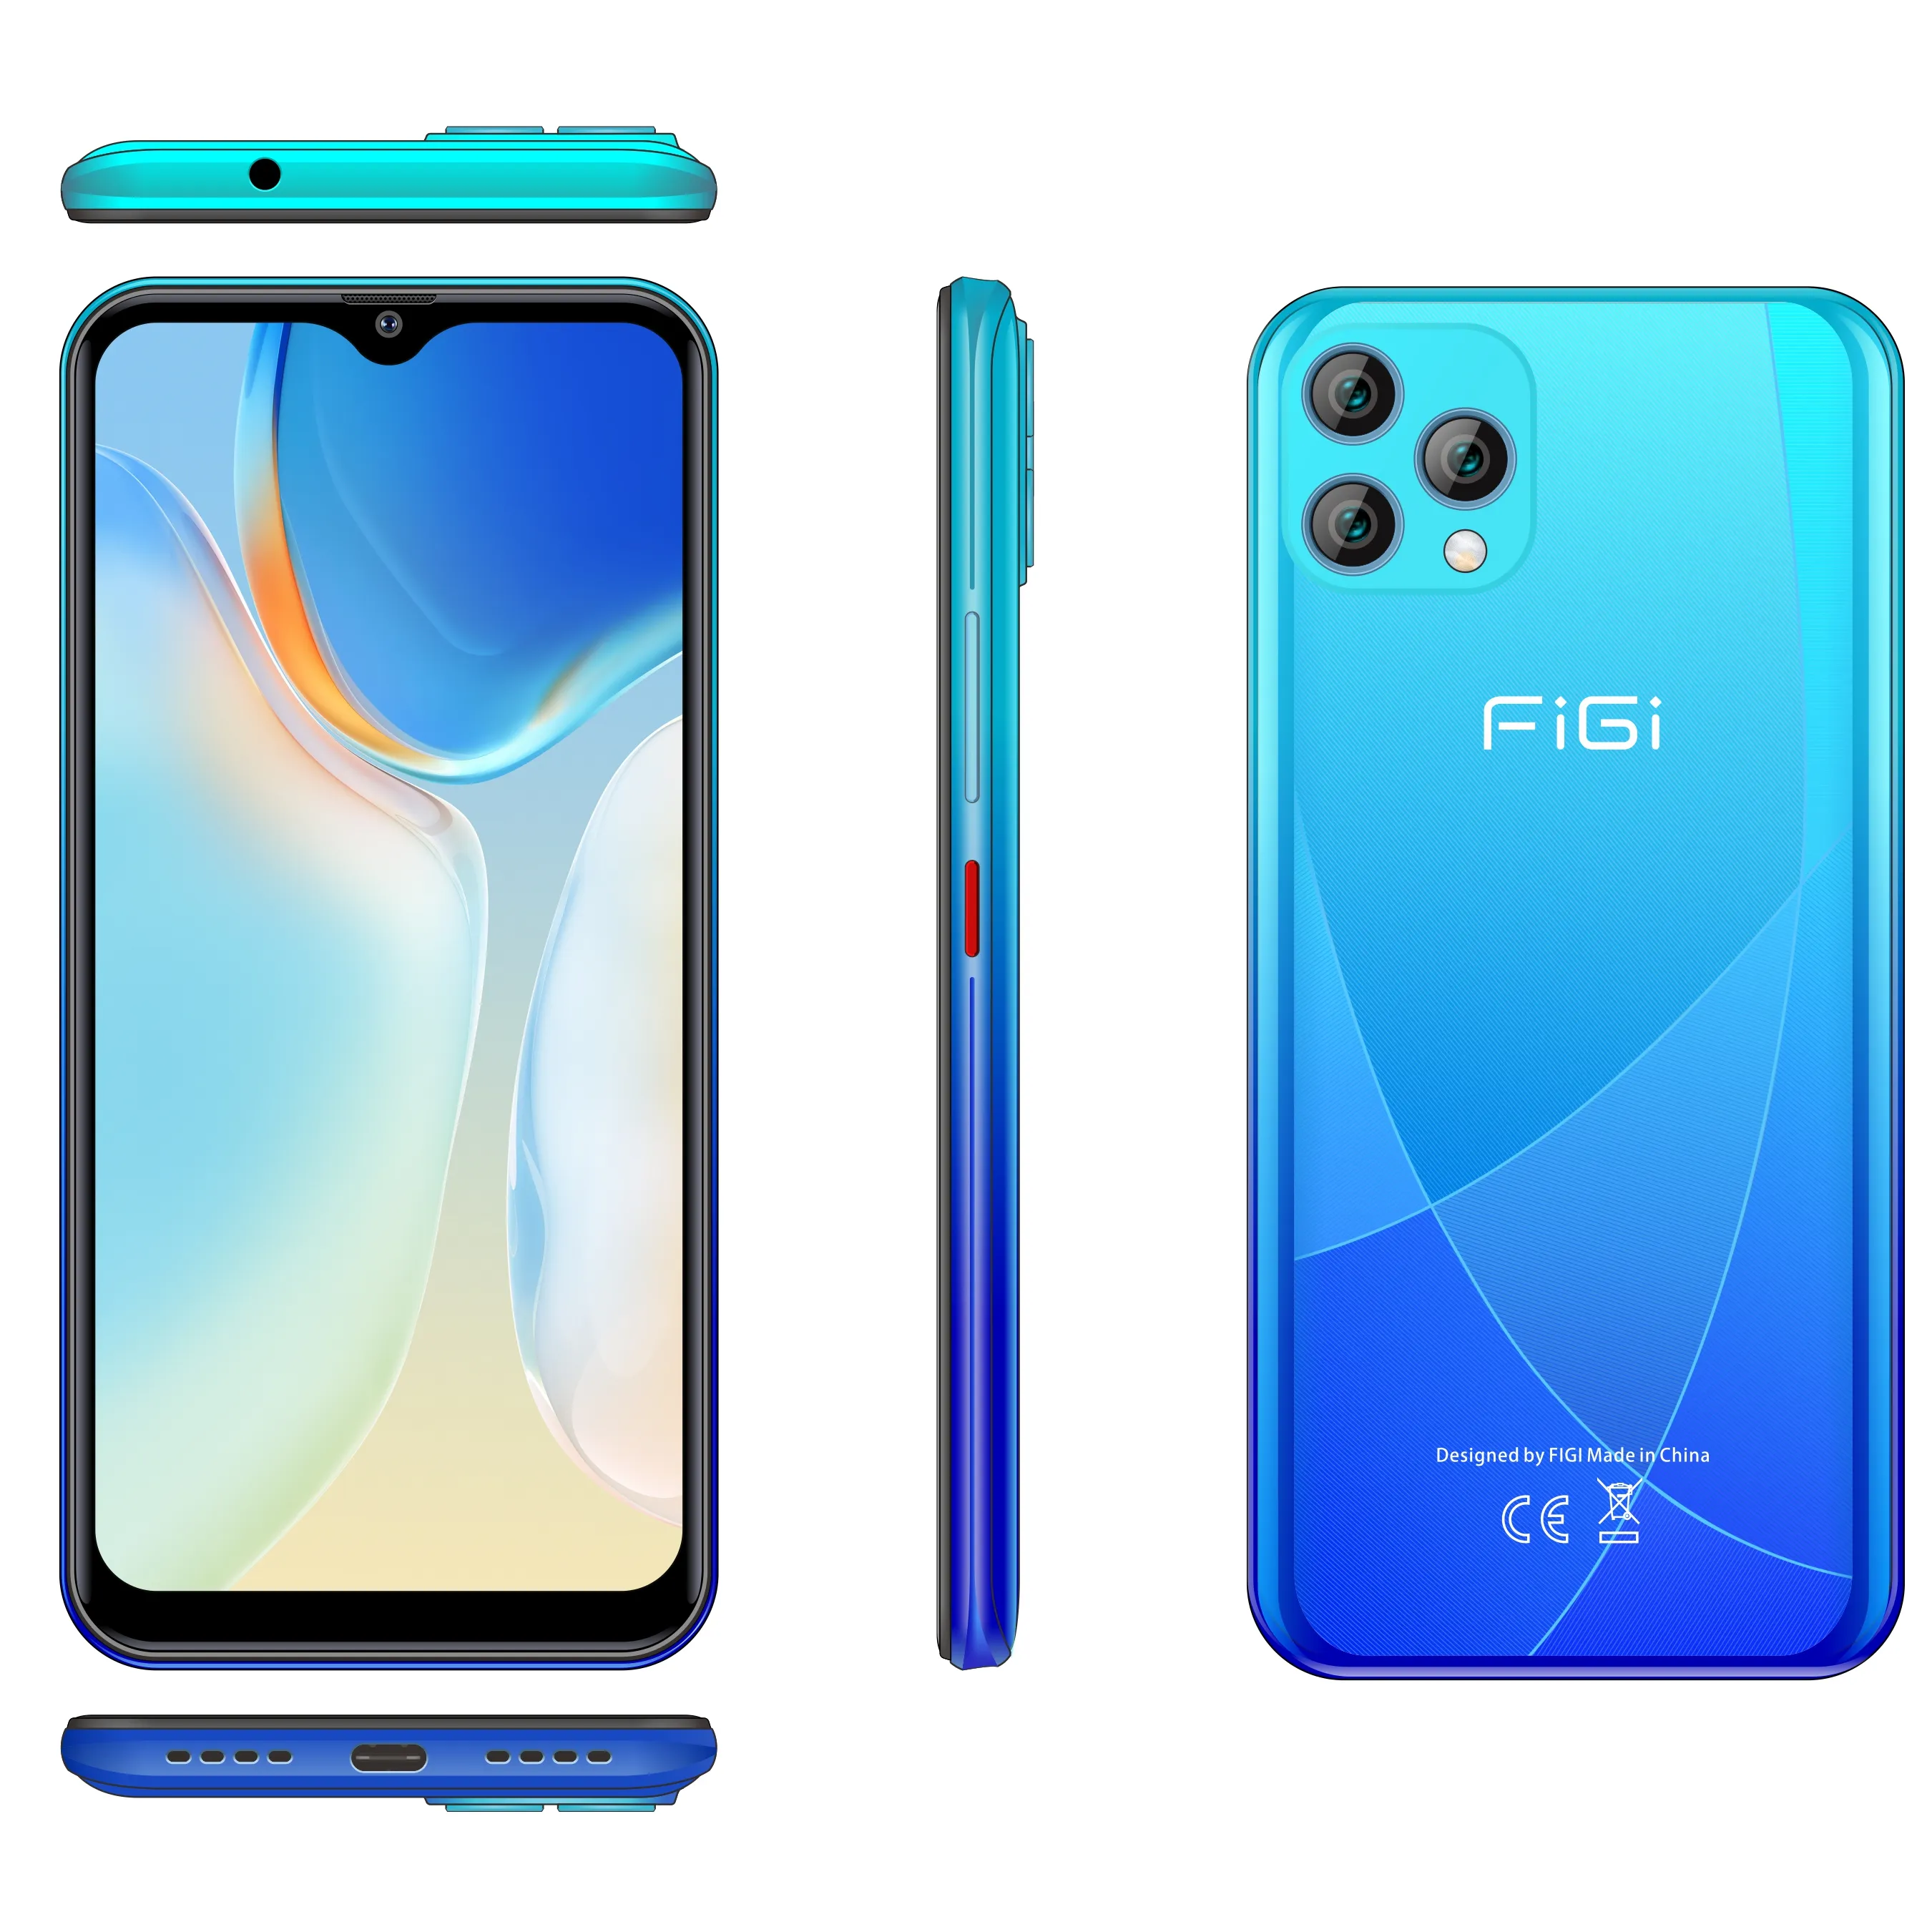 Cheap 4G Smart Phone FIGI NOTE 1S Android 11 4GB/128GB Bip Storage MT6771 Octa Core 6.6inch HD+ IPS Display 4500mAH Cell Phone